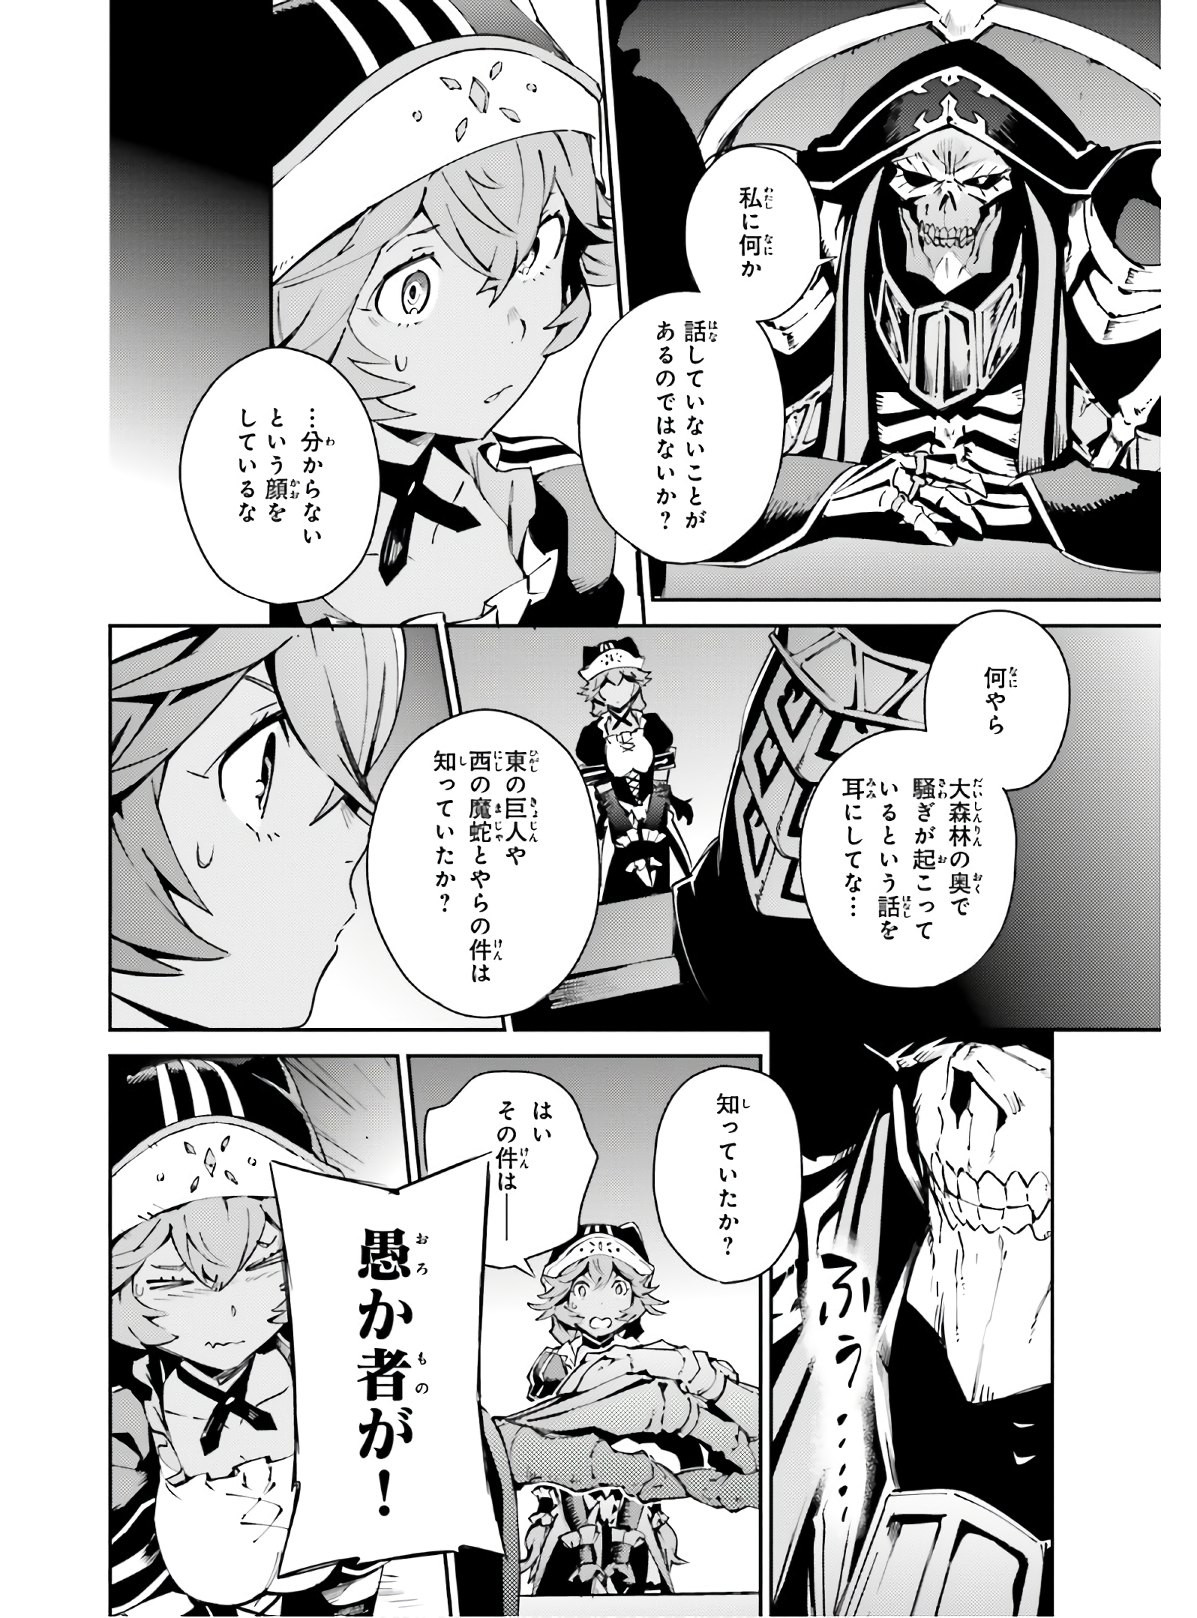 Overlord - Chapter 56-2 - Page 2